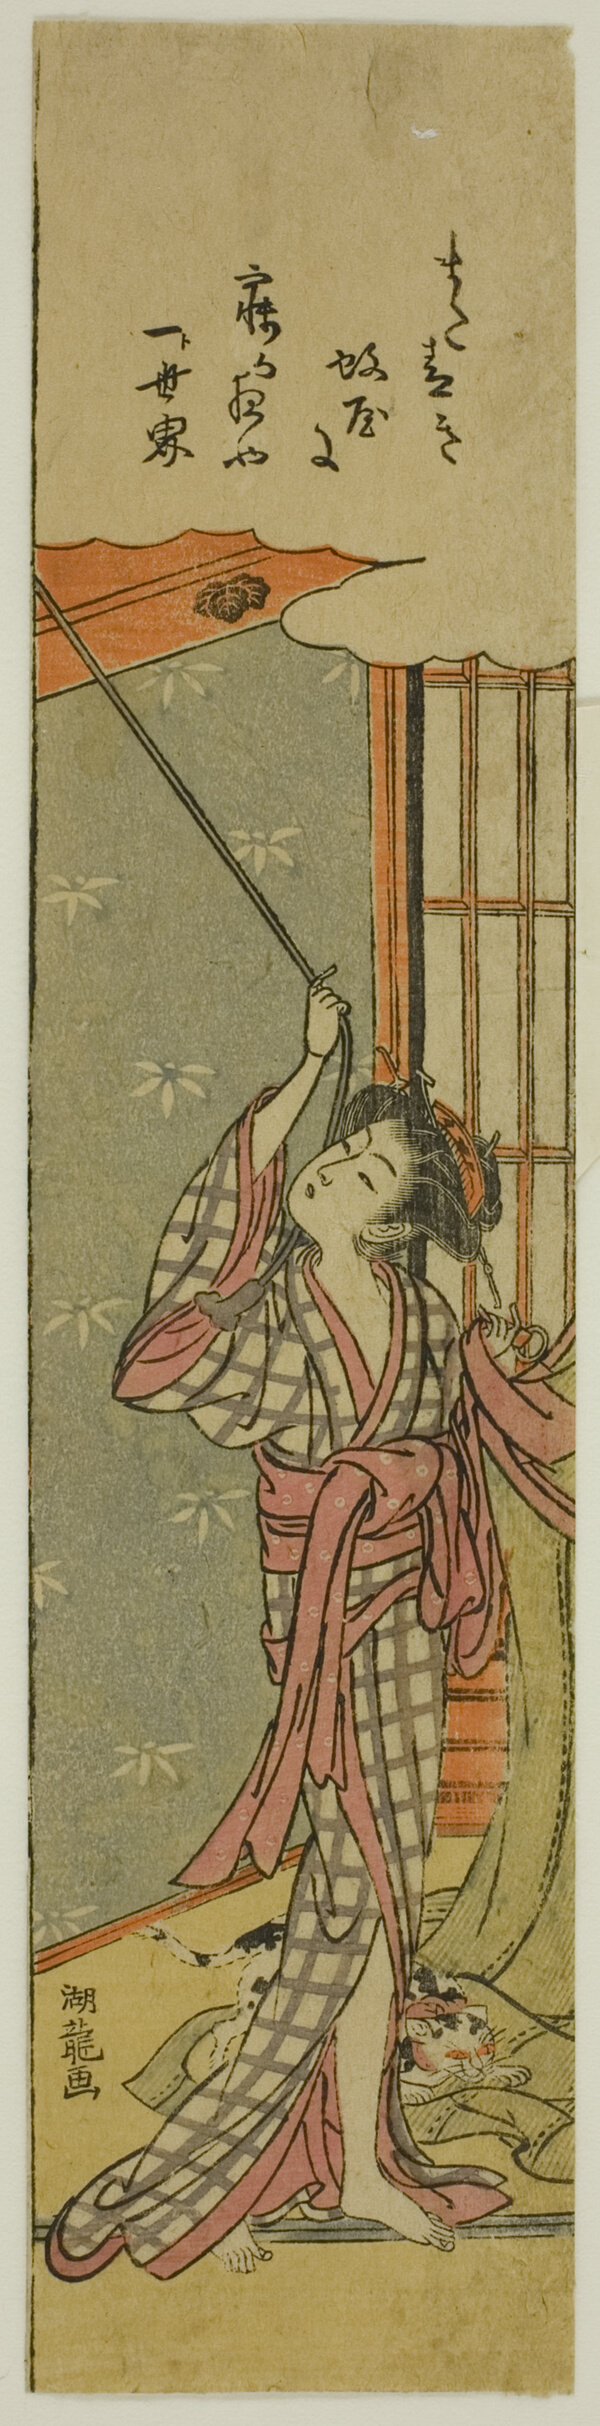 Young Woman Hanging a Mosquito Net